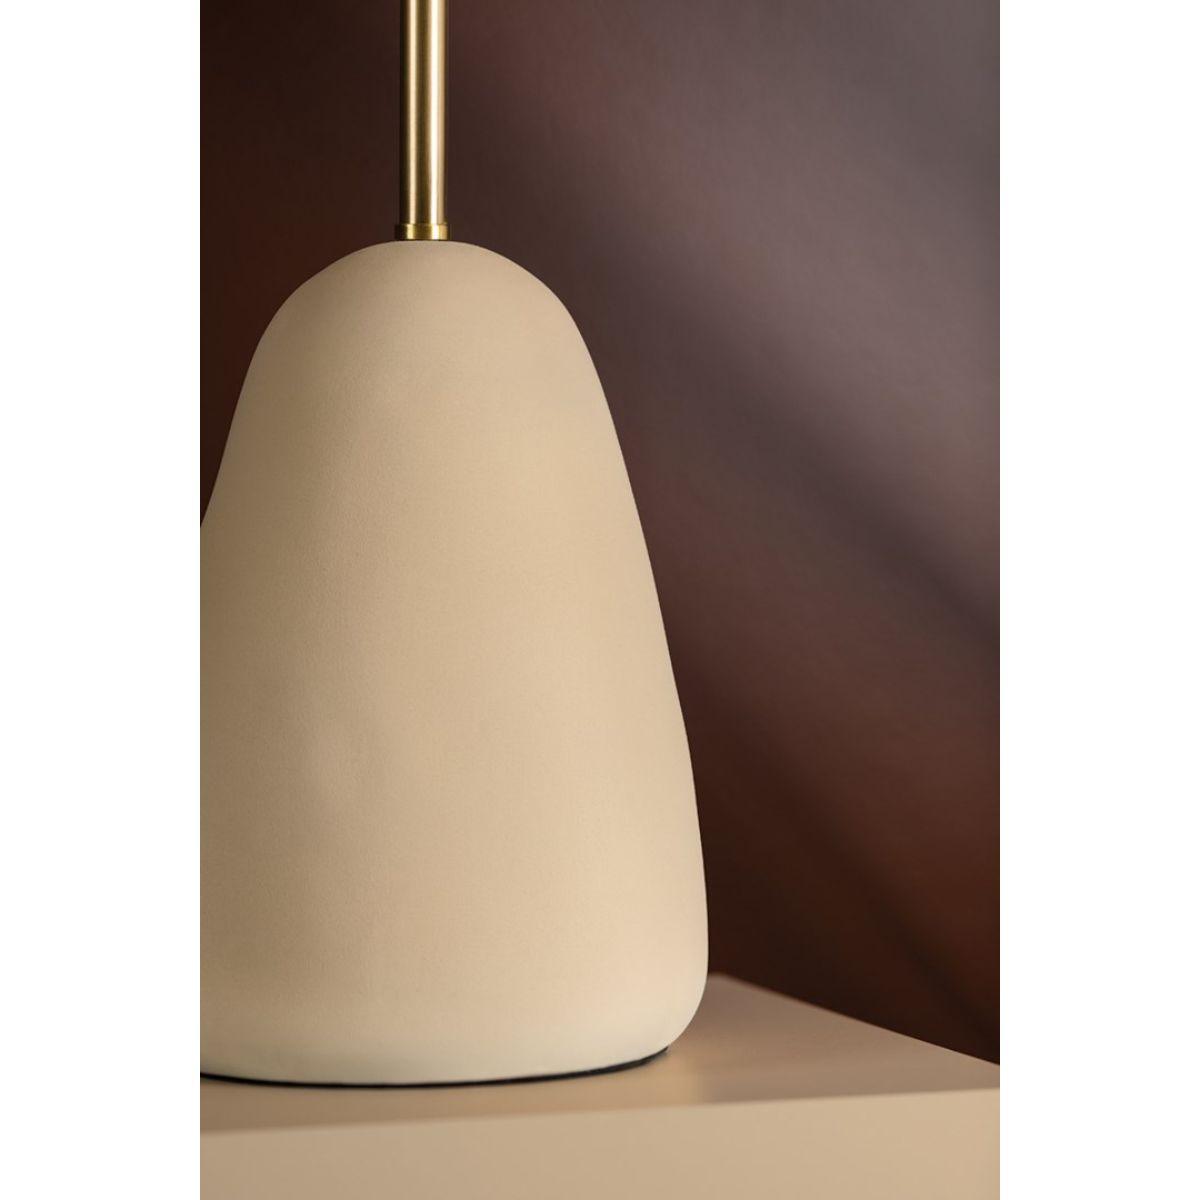 Maia 2 Lights Table Lamp Ceramic Textured Beige and Aged Brass Accents